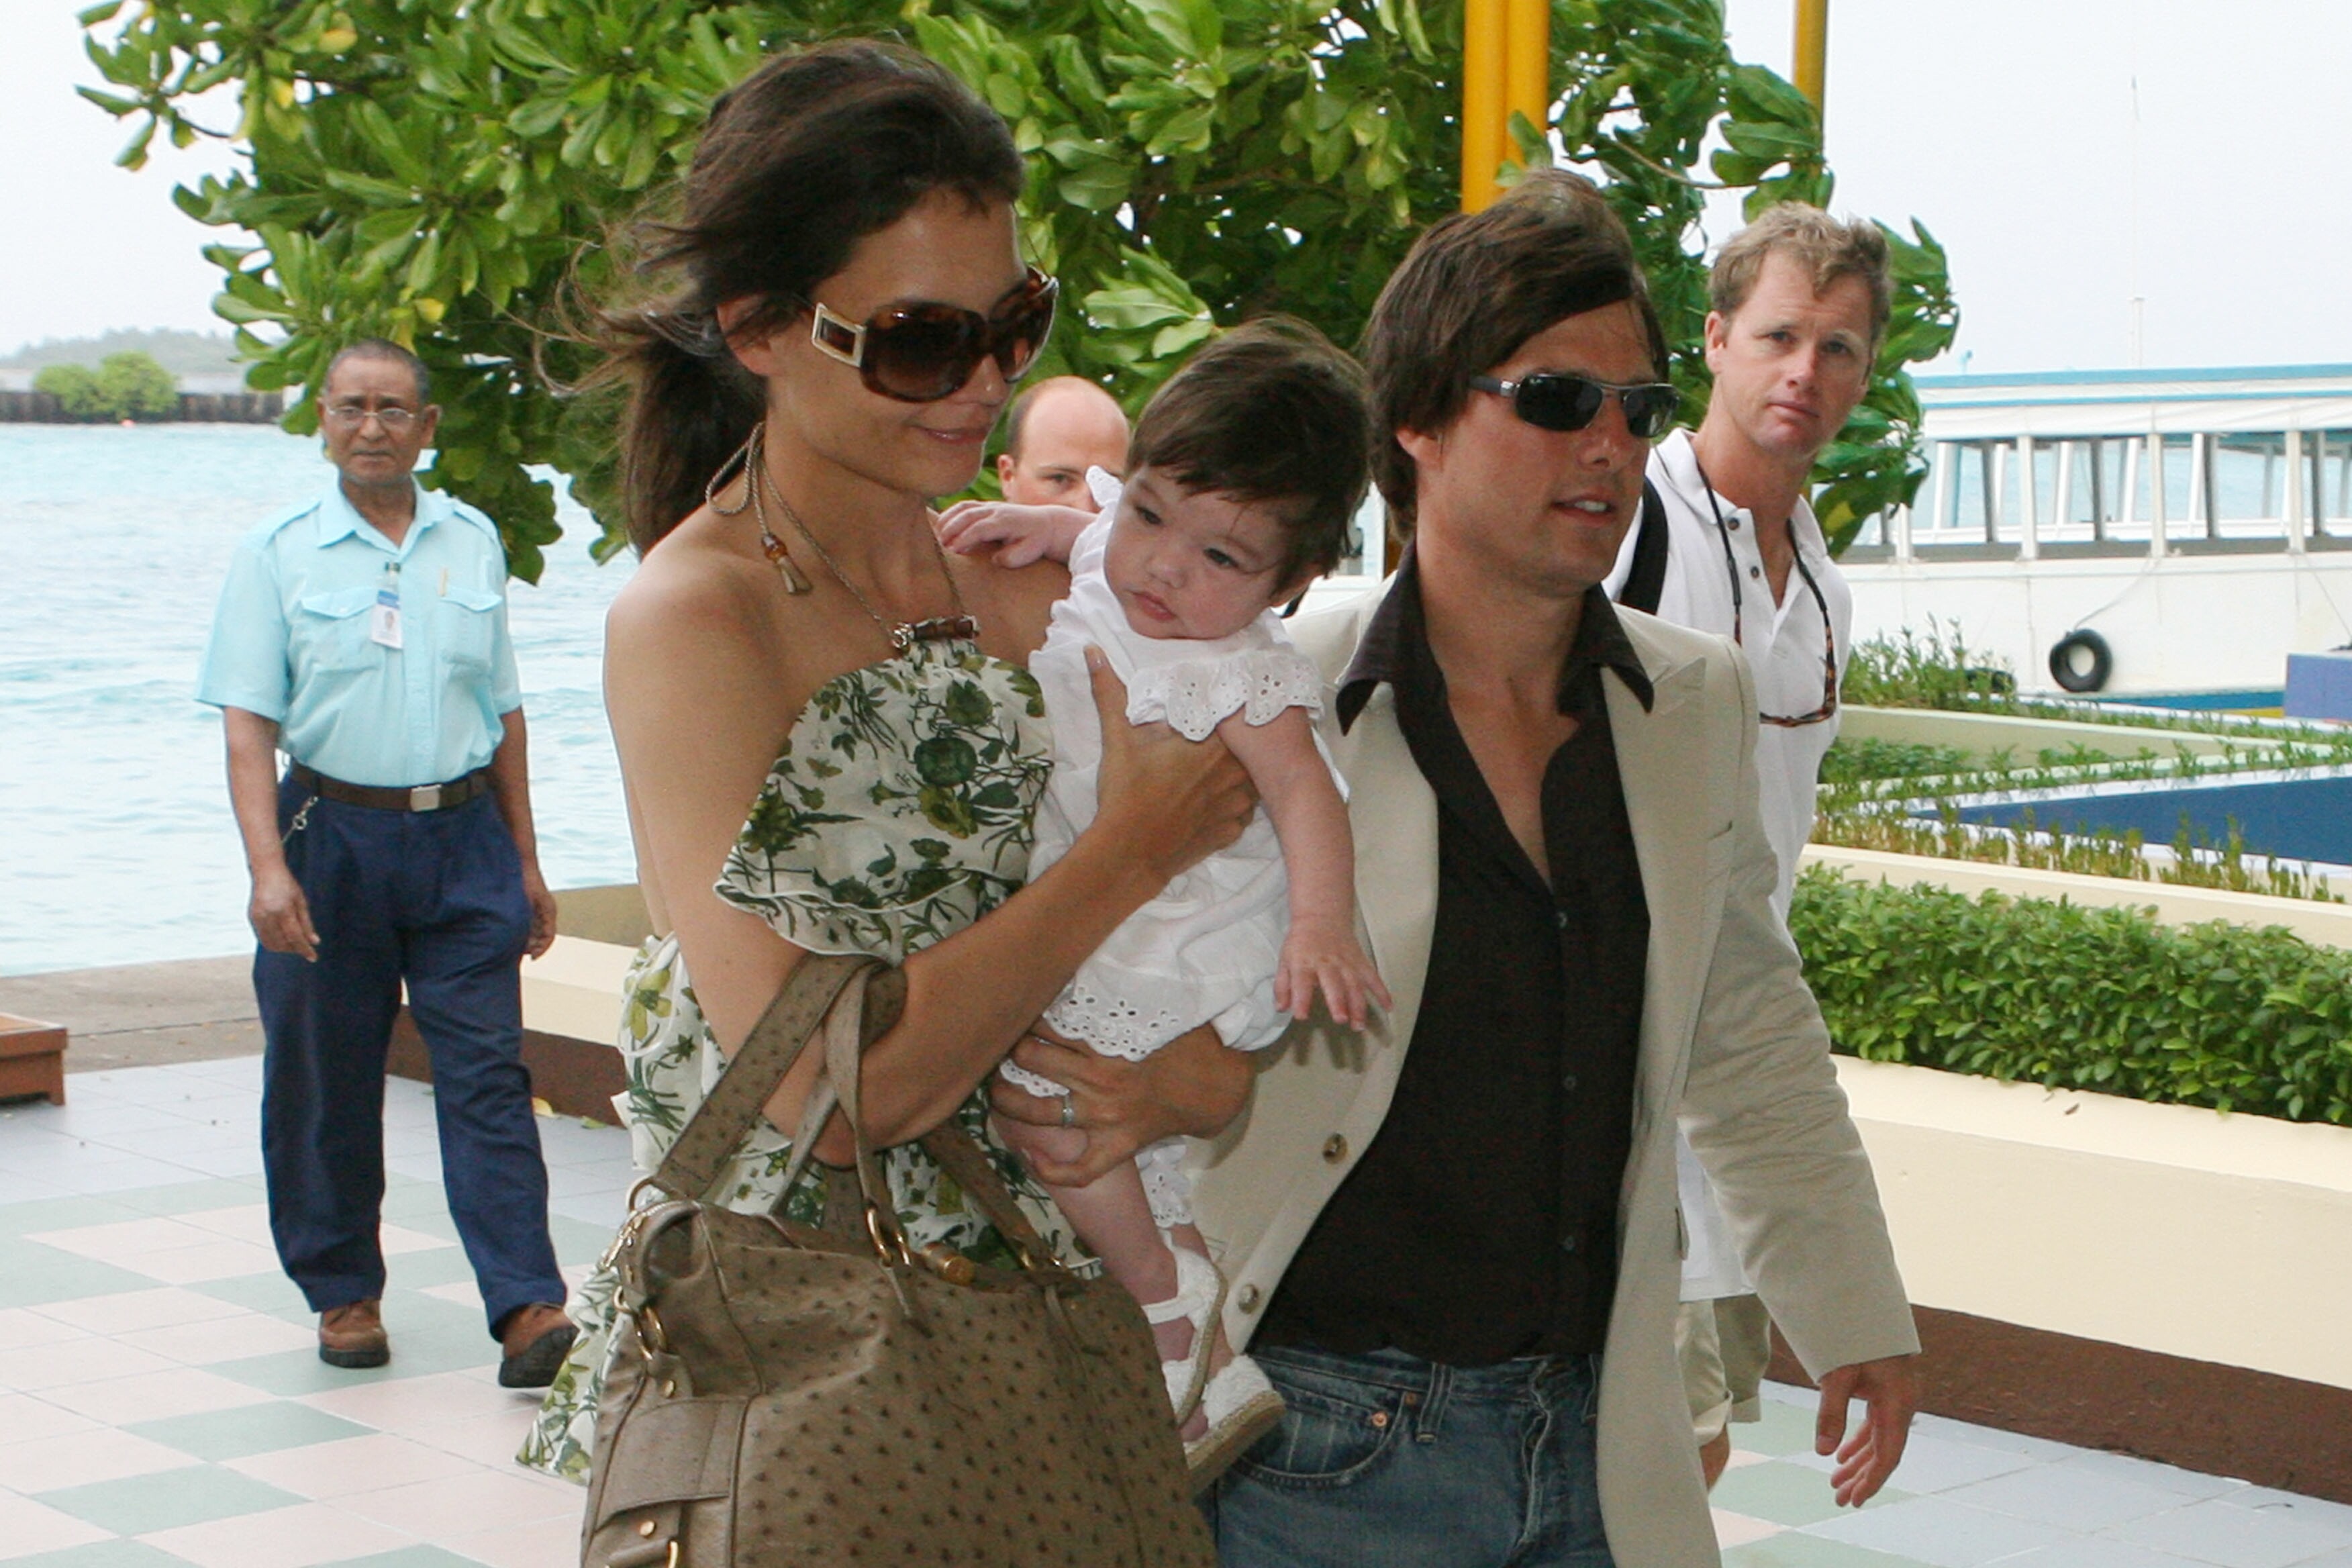 <p>In April 2006, Tom Cruise and <a href="https://www.wonderwall.com/celebrity/profiles/overview/katie-holmes-332.article">Katie Holmes</a> welcomed daughter Suri Cruise. Their baby girl made her public debut in the October 2006 issue of Vanity Fair in a cover story featuring exclusive photos shot by Annie Leibovitz. The family is pictured here in the Maldives that December.</p>